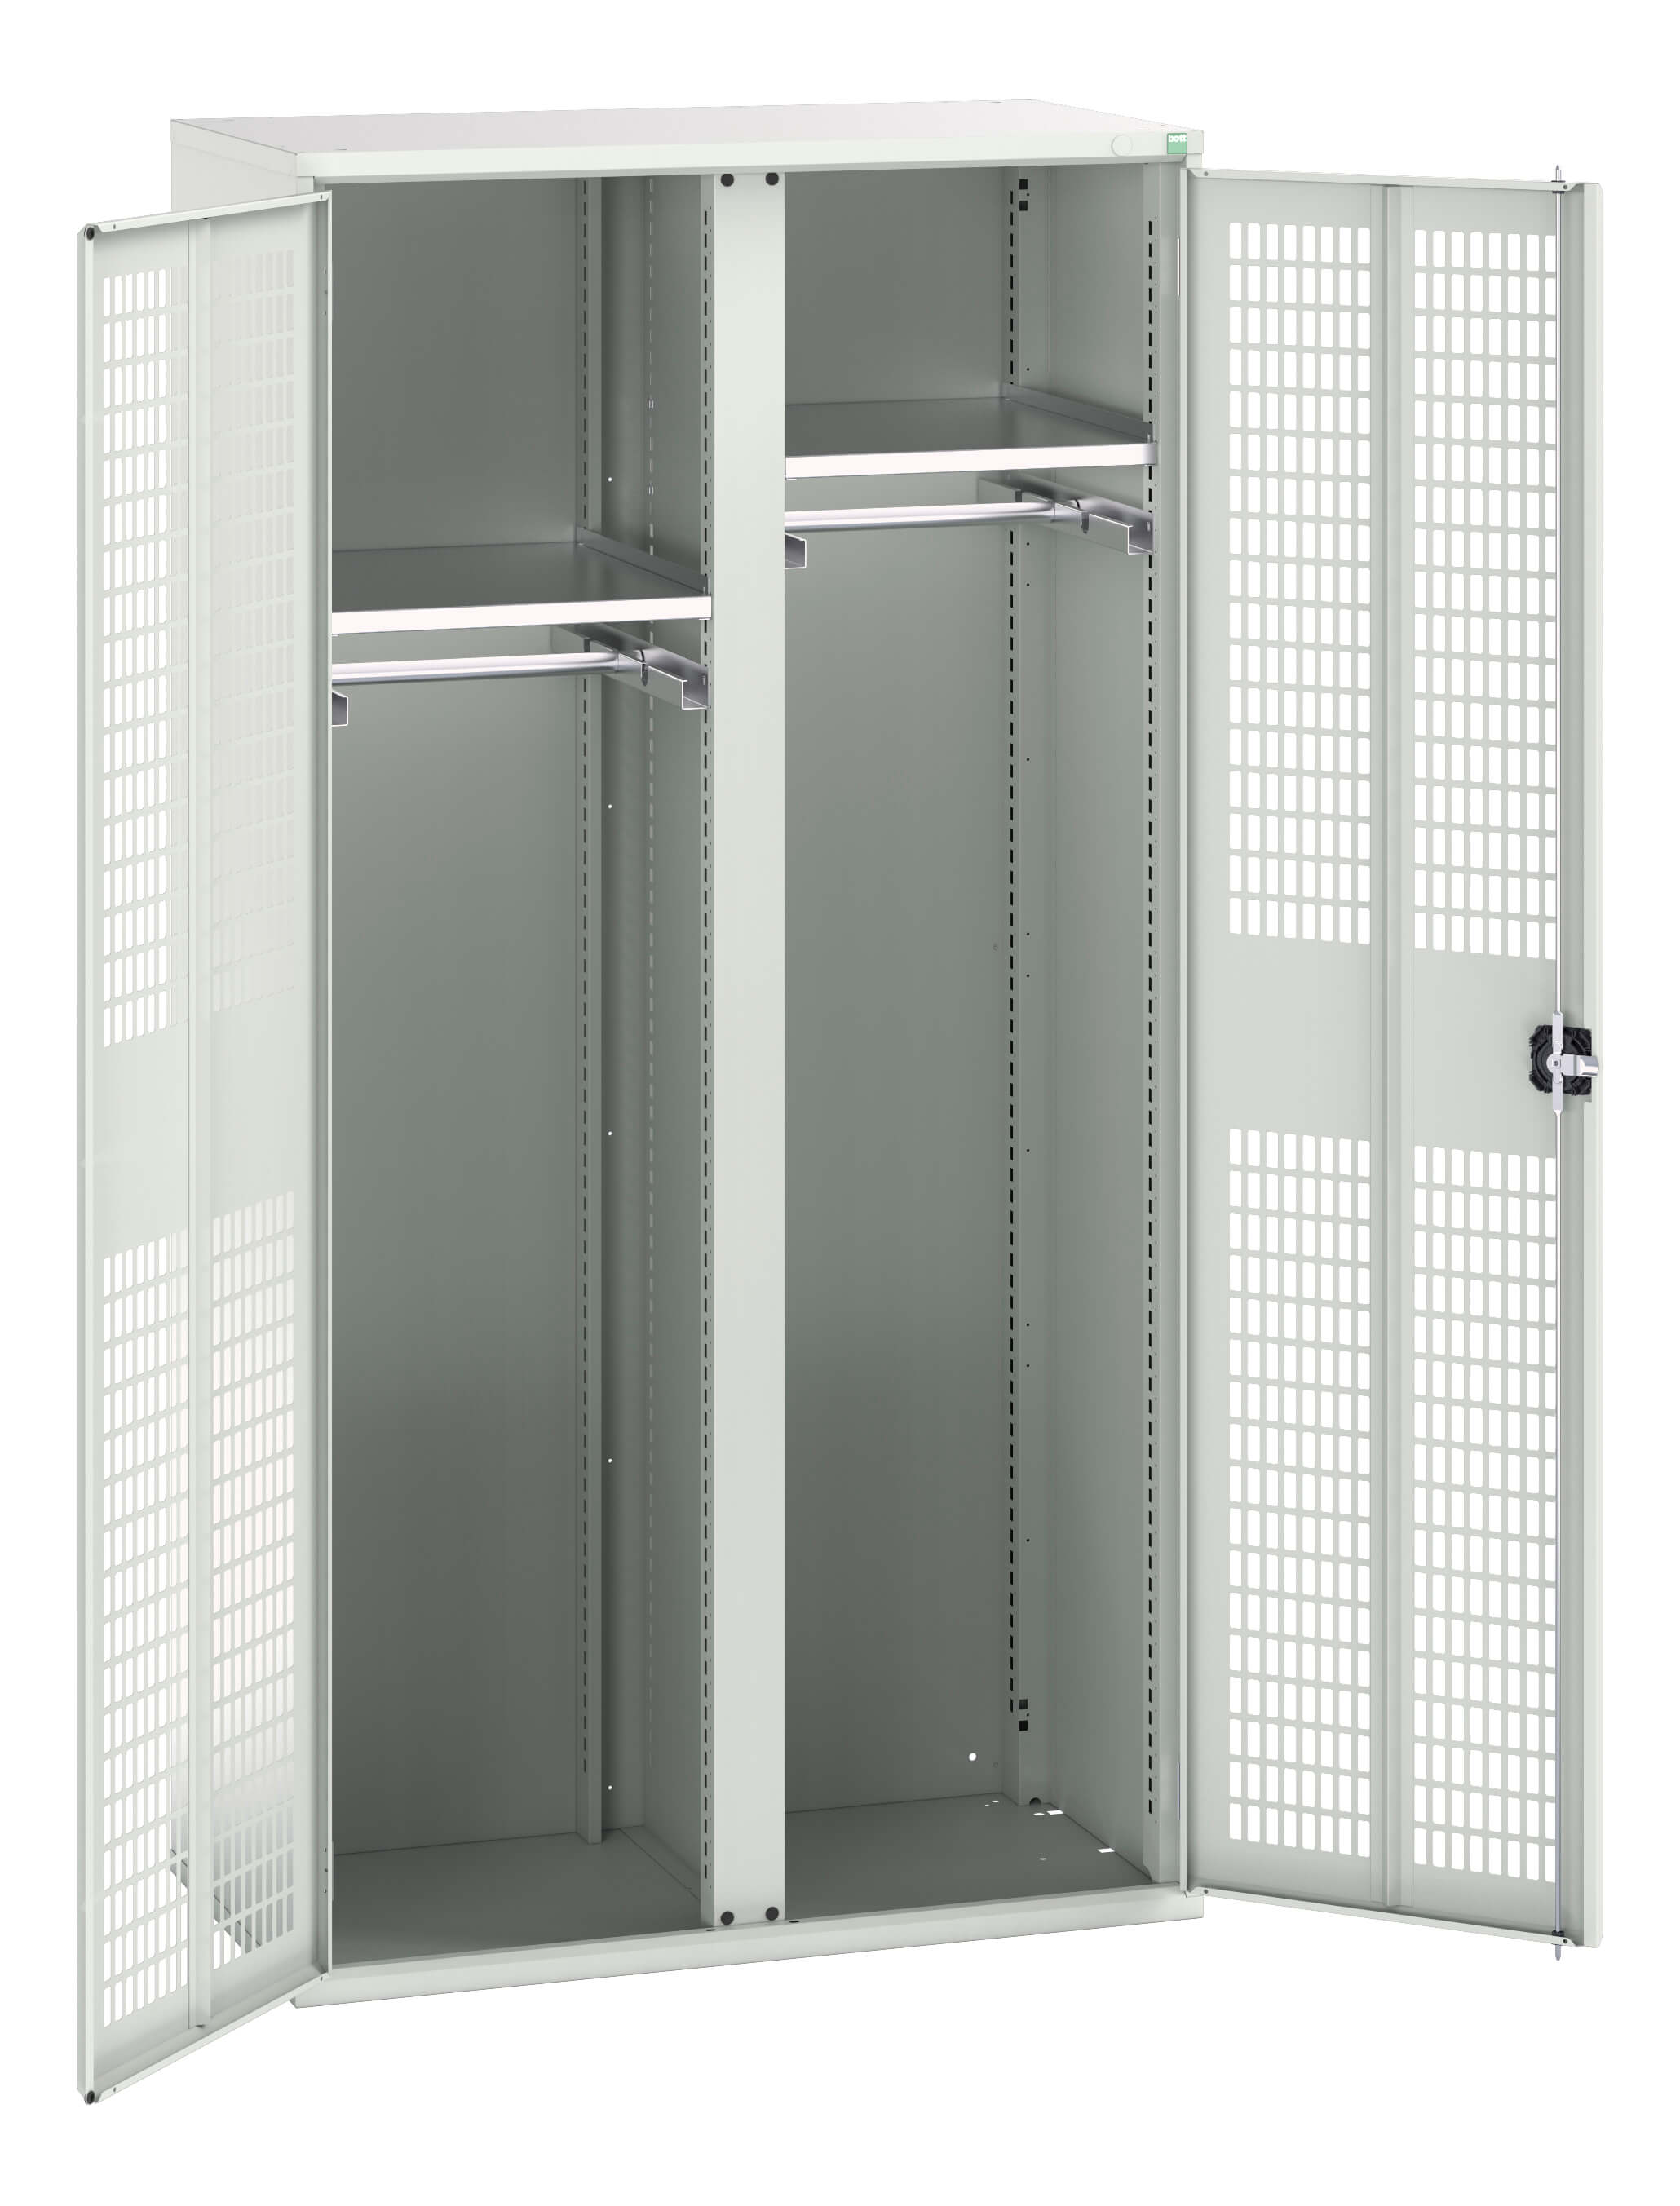 Bott Verso Ventilated Door Ppe / Janitorial Kitted Cupboard With Vertical Partition - 16926773.16